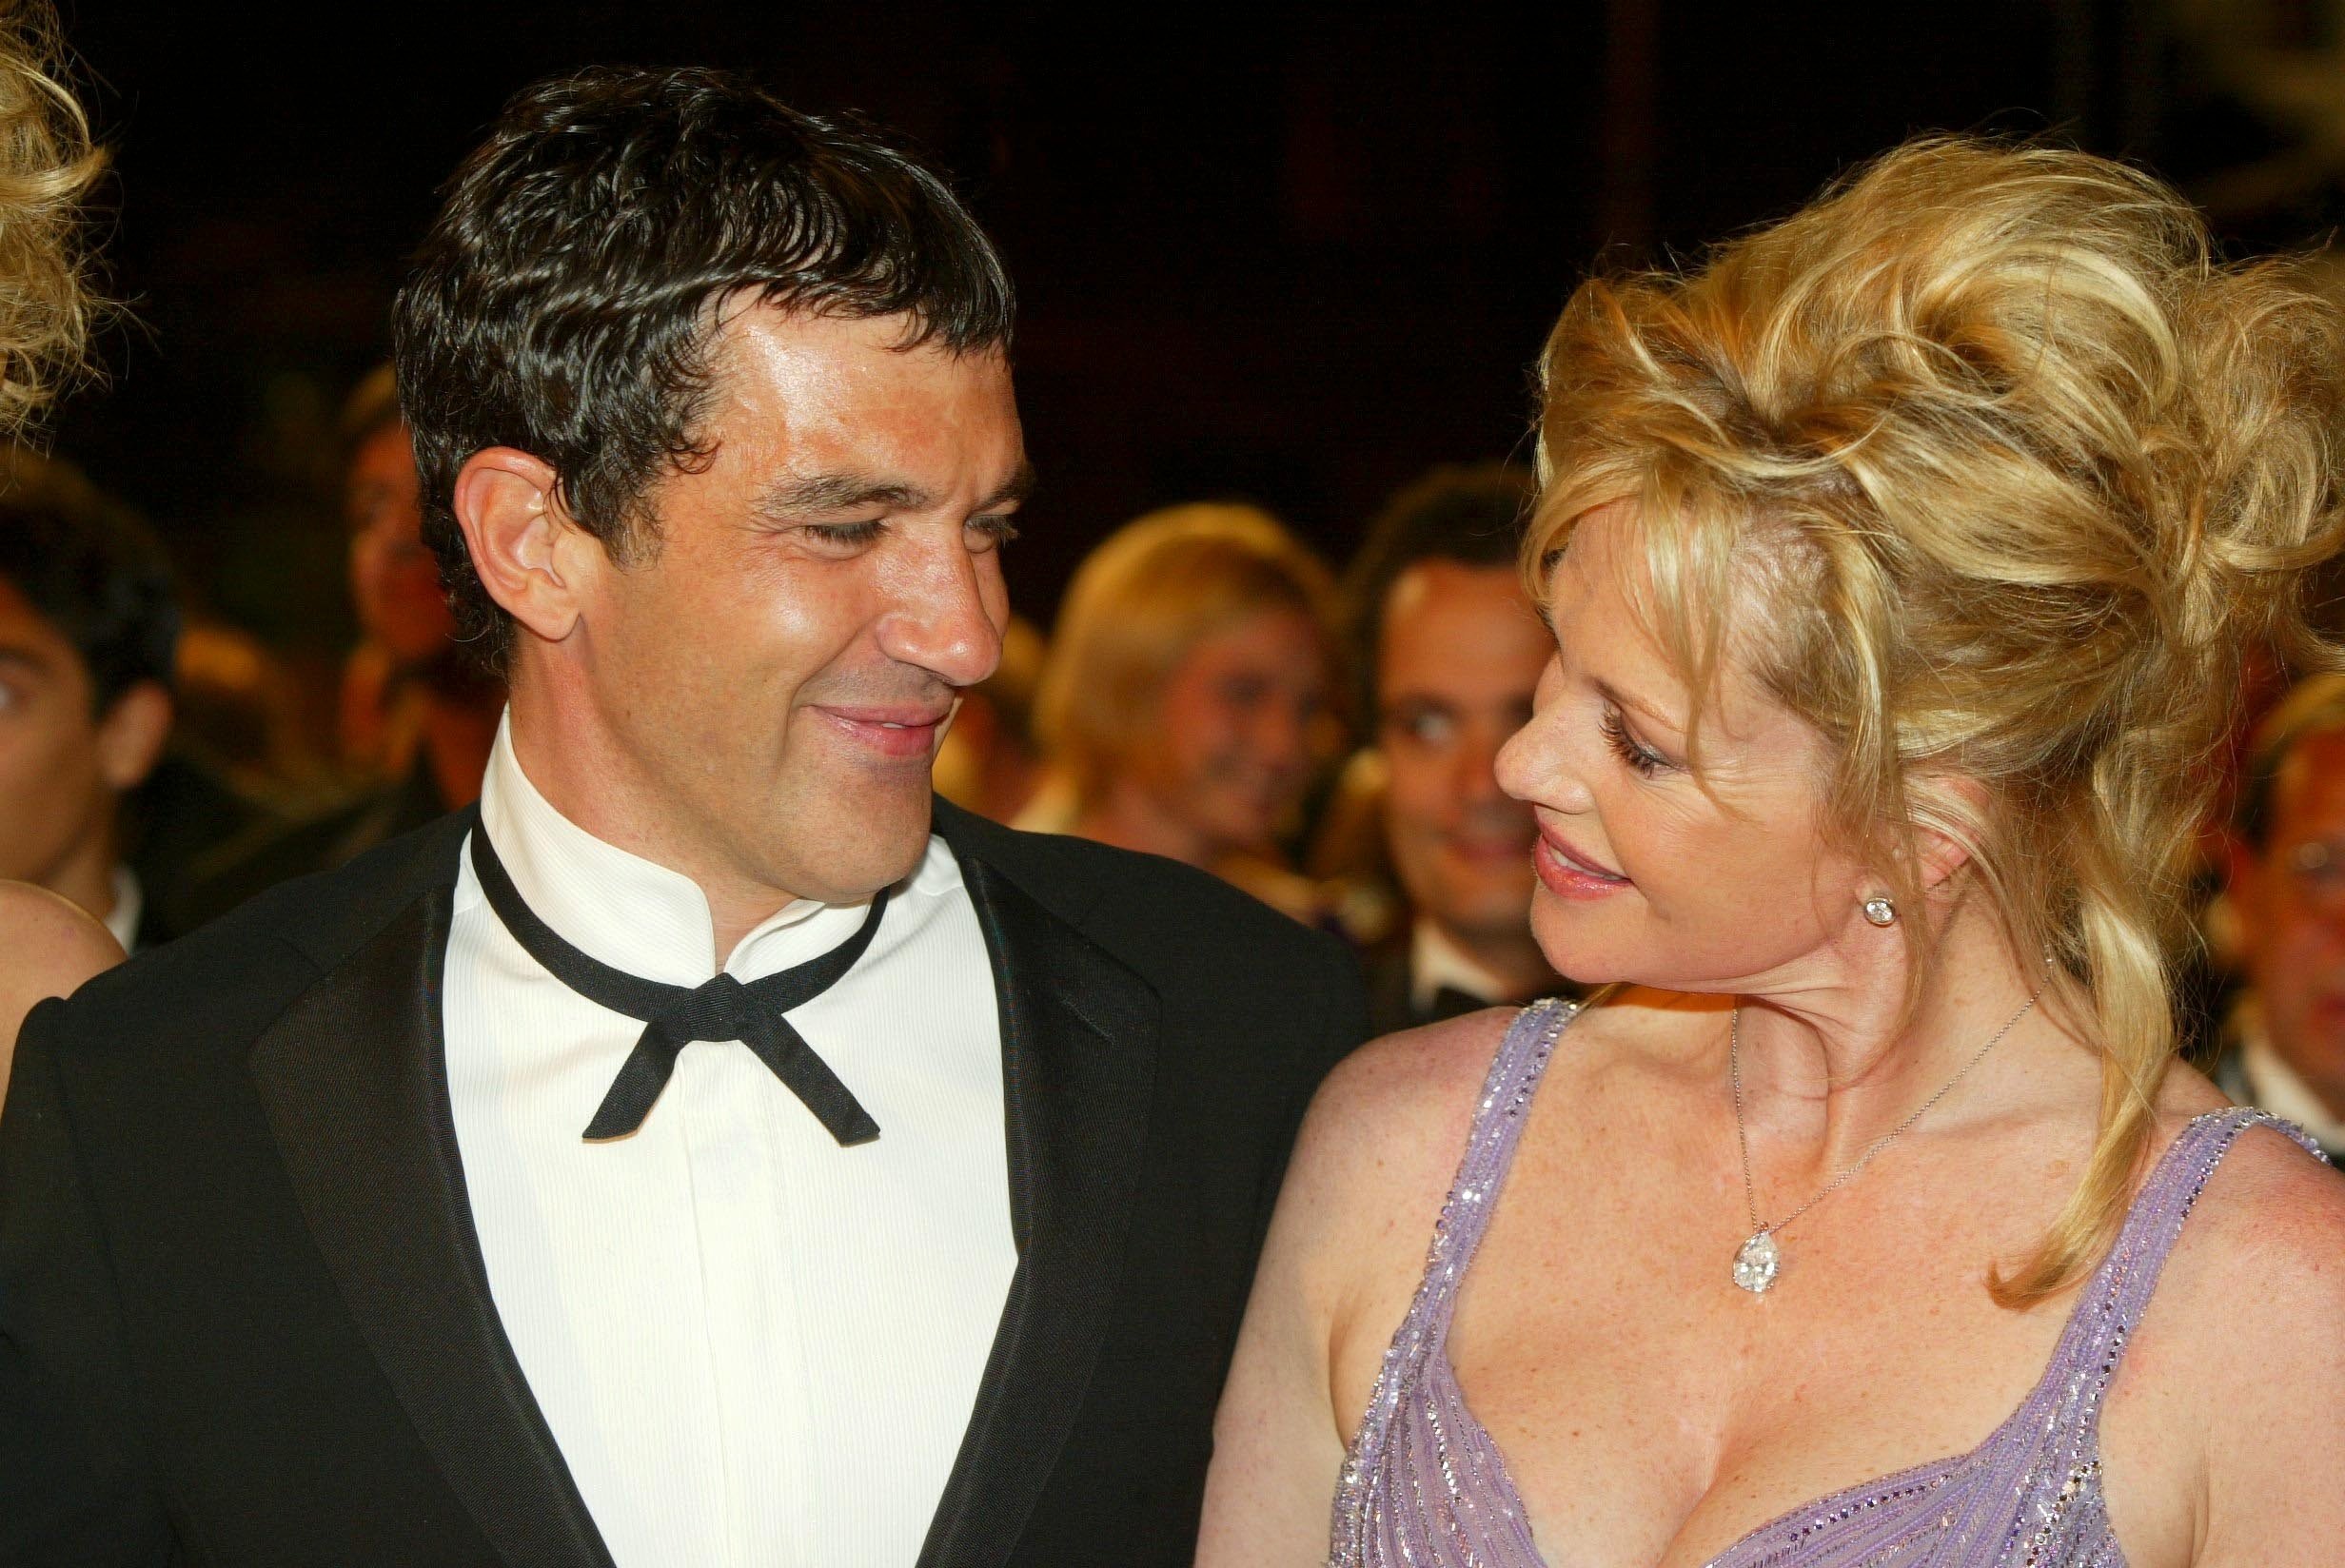 Antonio Banderas and Melanie Griffith during the 55th Cannes film festival: Stairs of "Femme Fatale" on May 25, 2002 in Cannes, France ┃Source: Getty Images